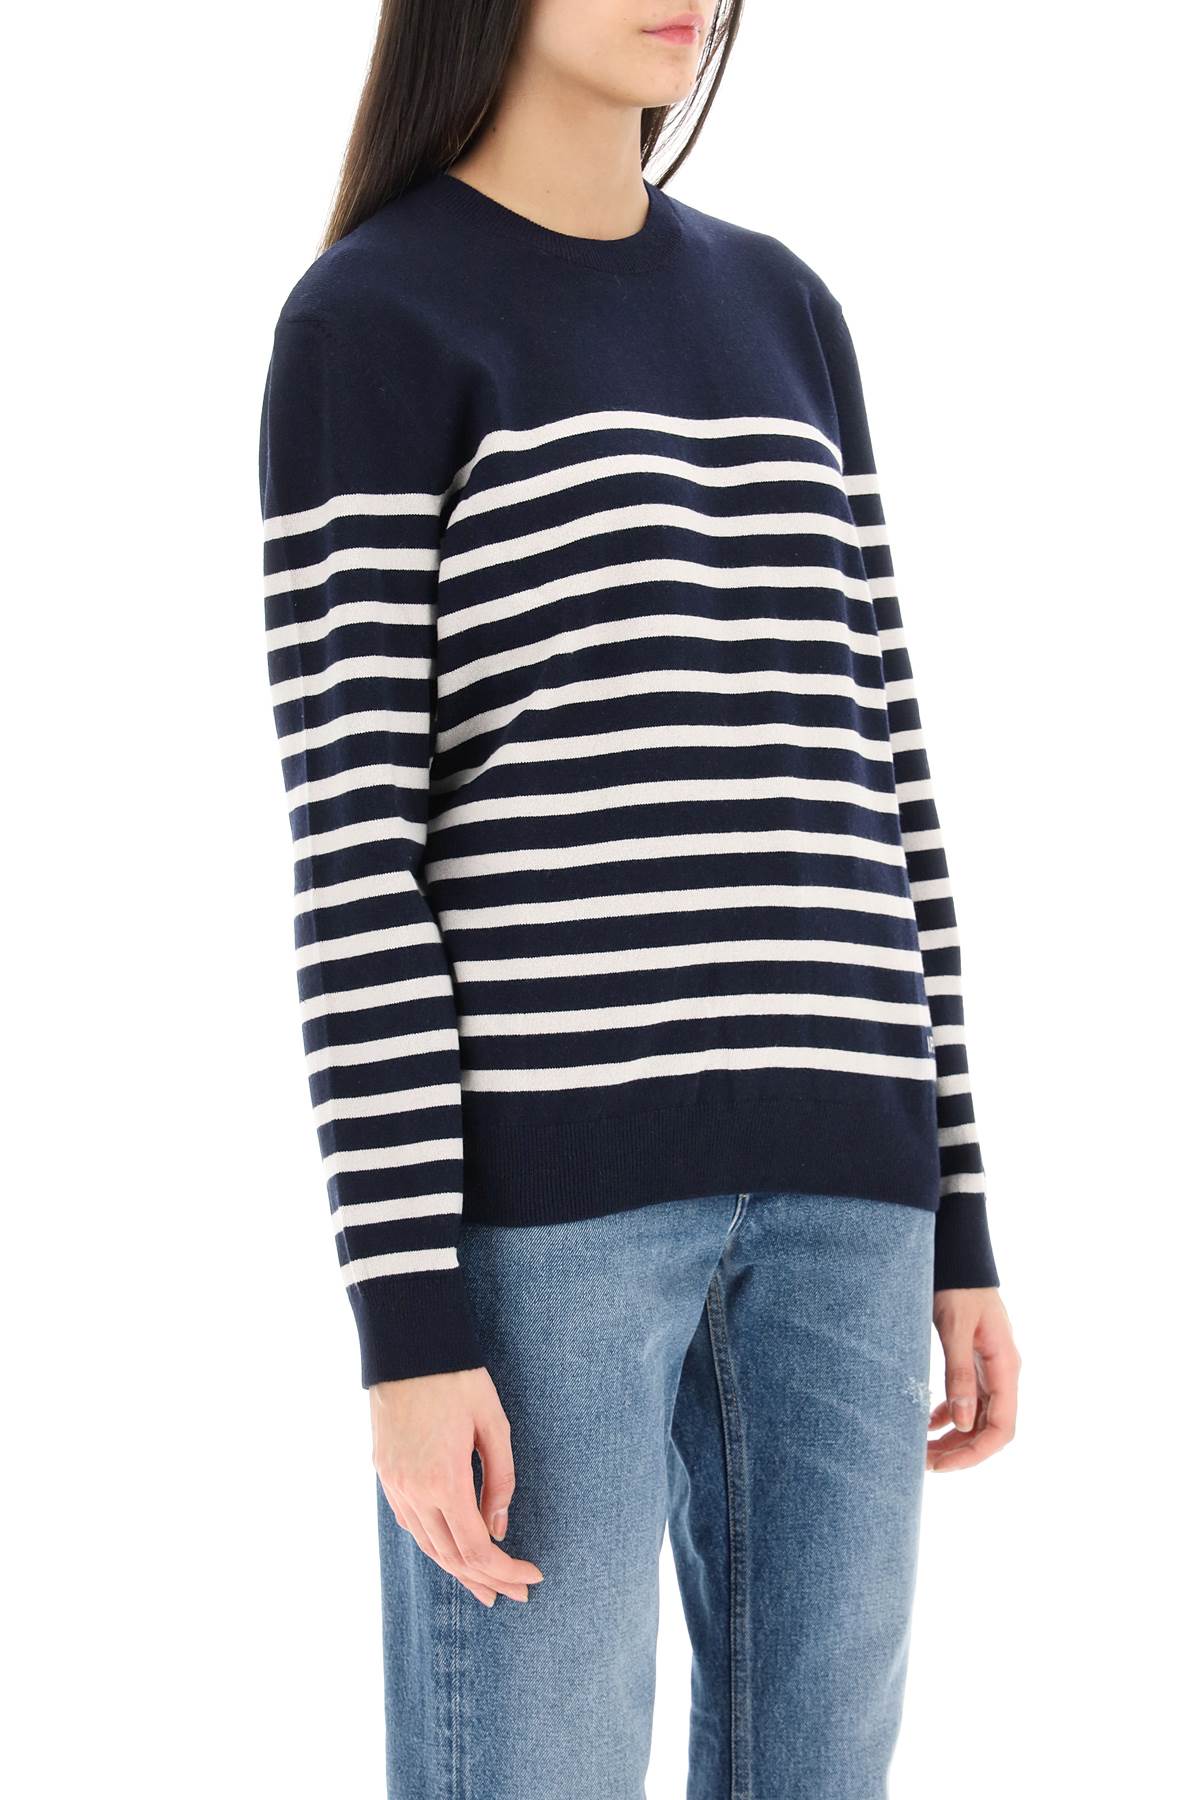 Shop Apc Phoebe Striped Cashmere And Cotton Sweater In Dark Navy (blue)